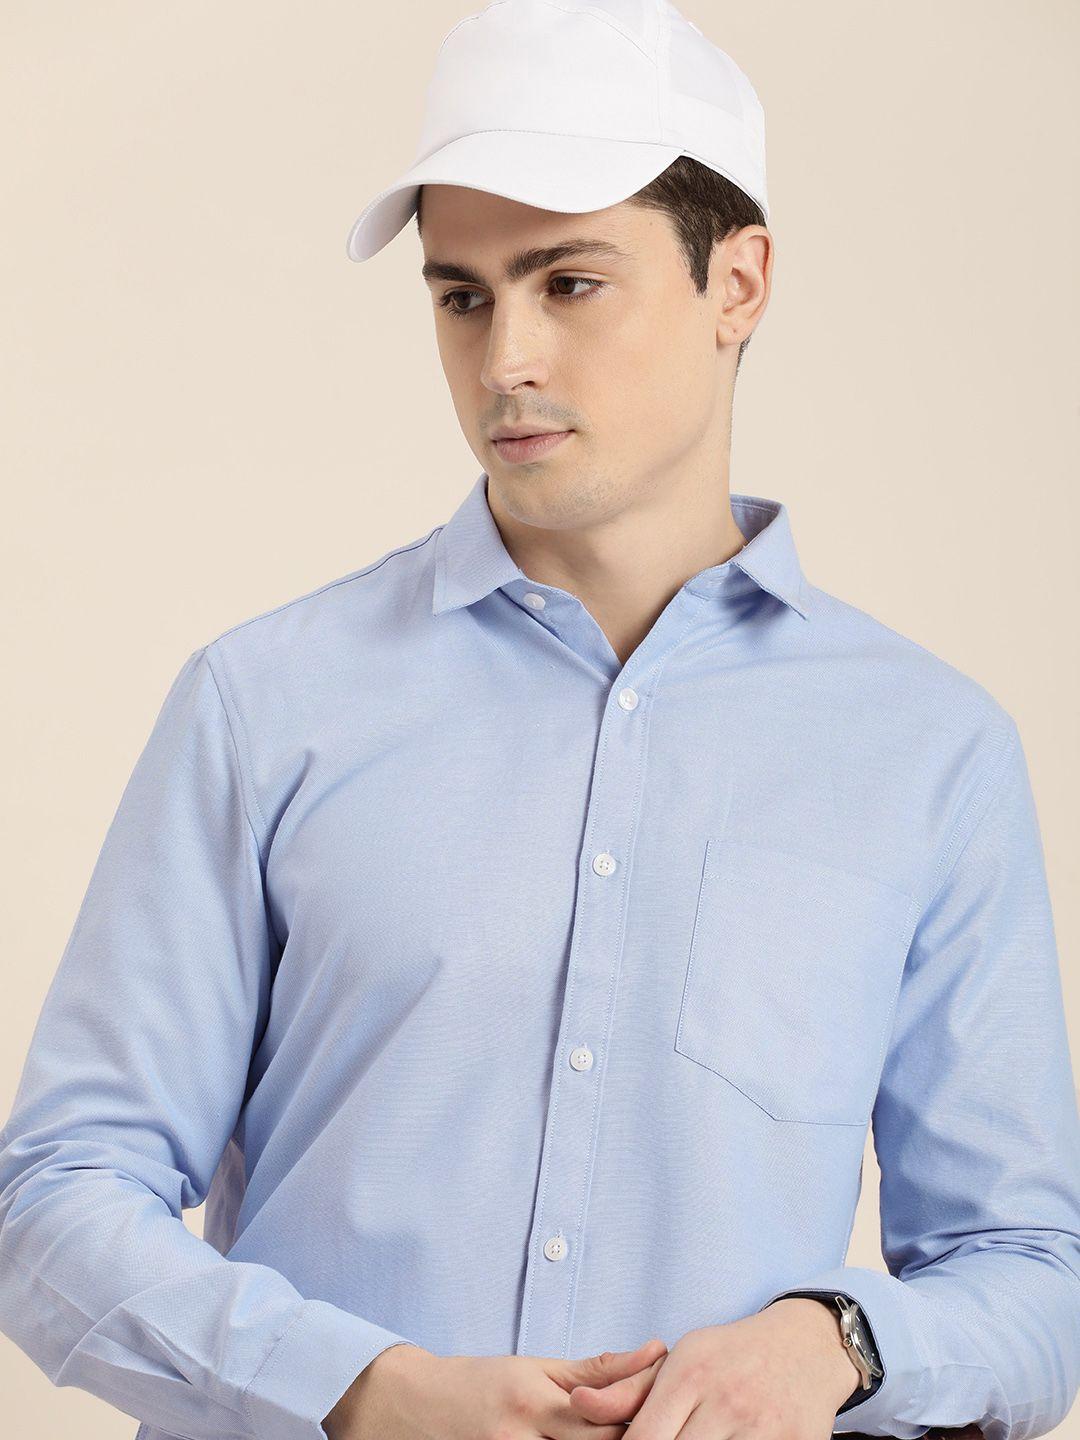 encore by invictus casual shirt